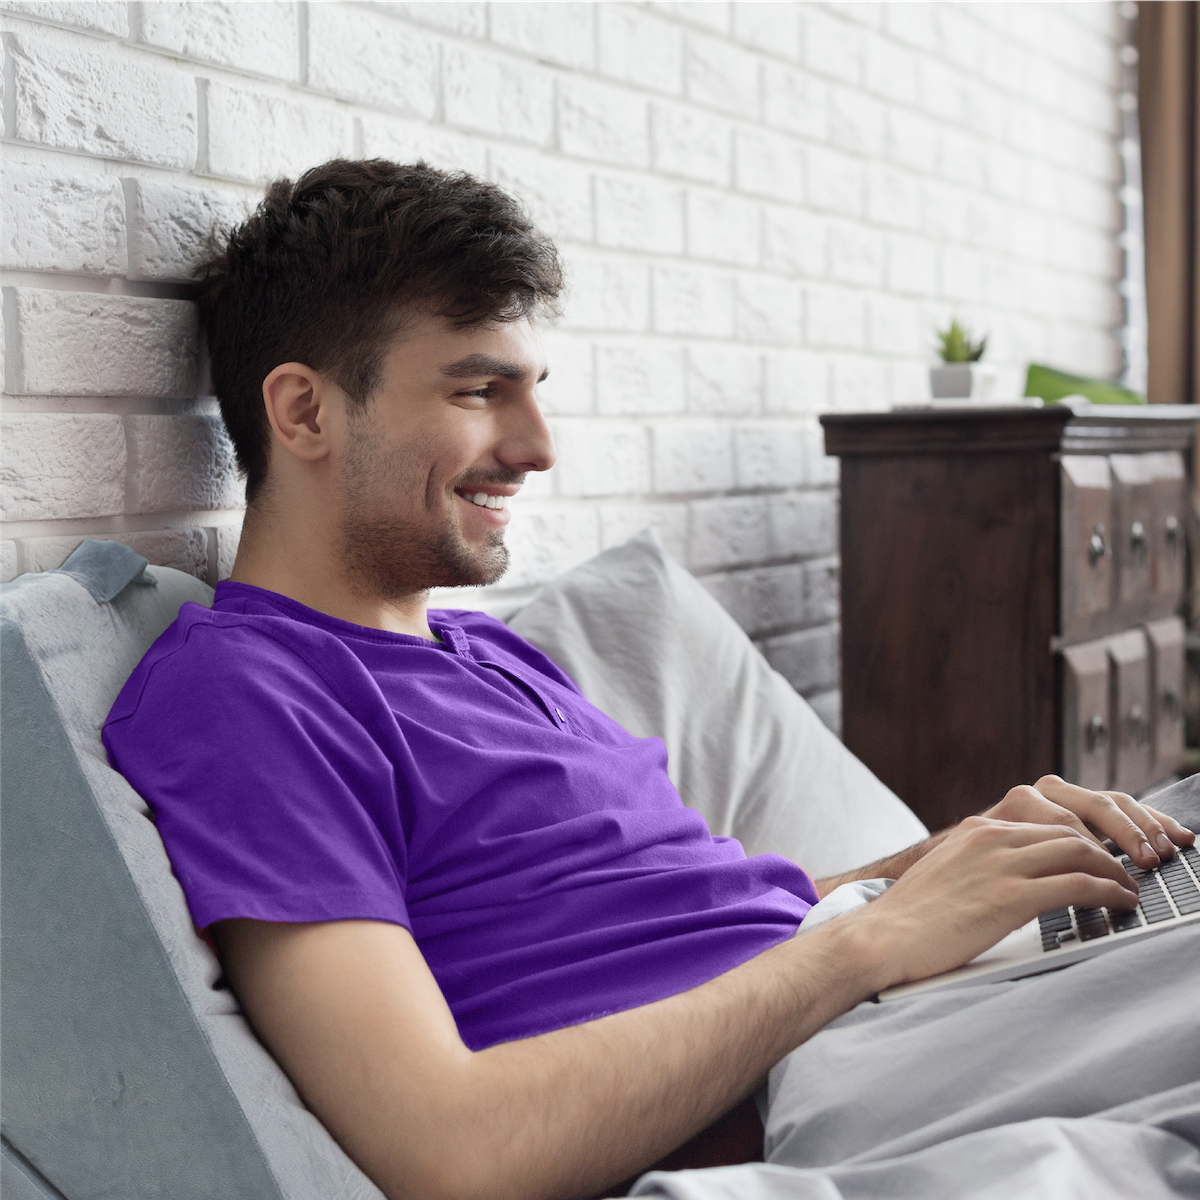 folding wedge pillow used by man in purple shirt